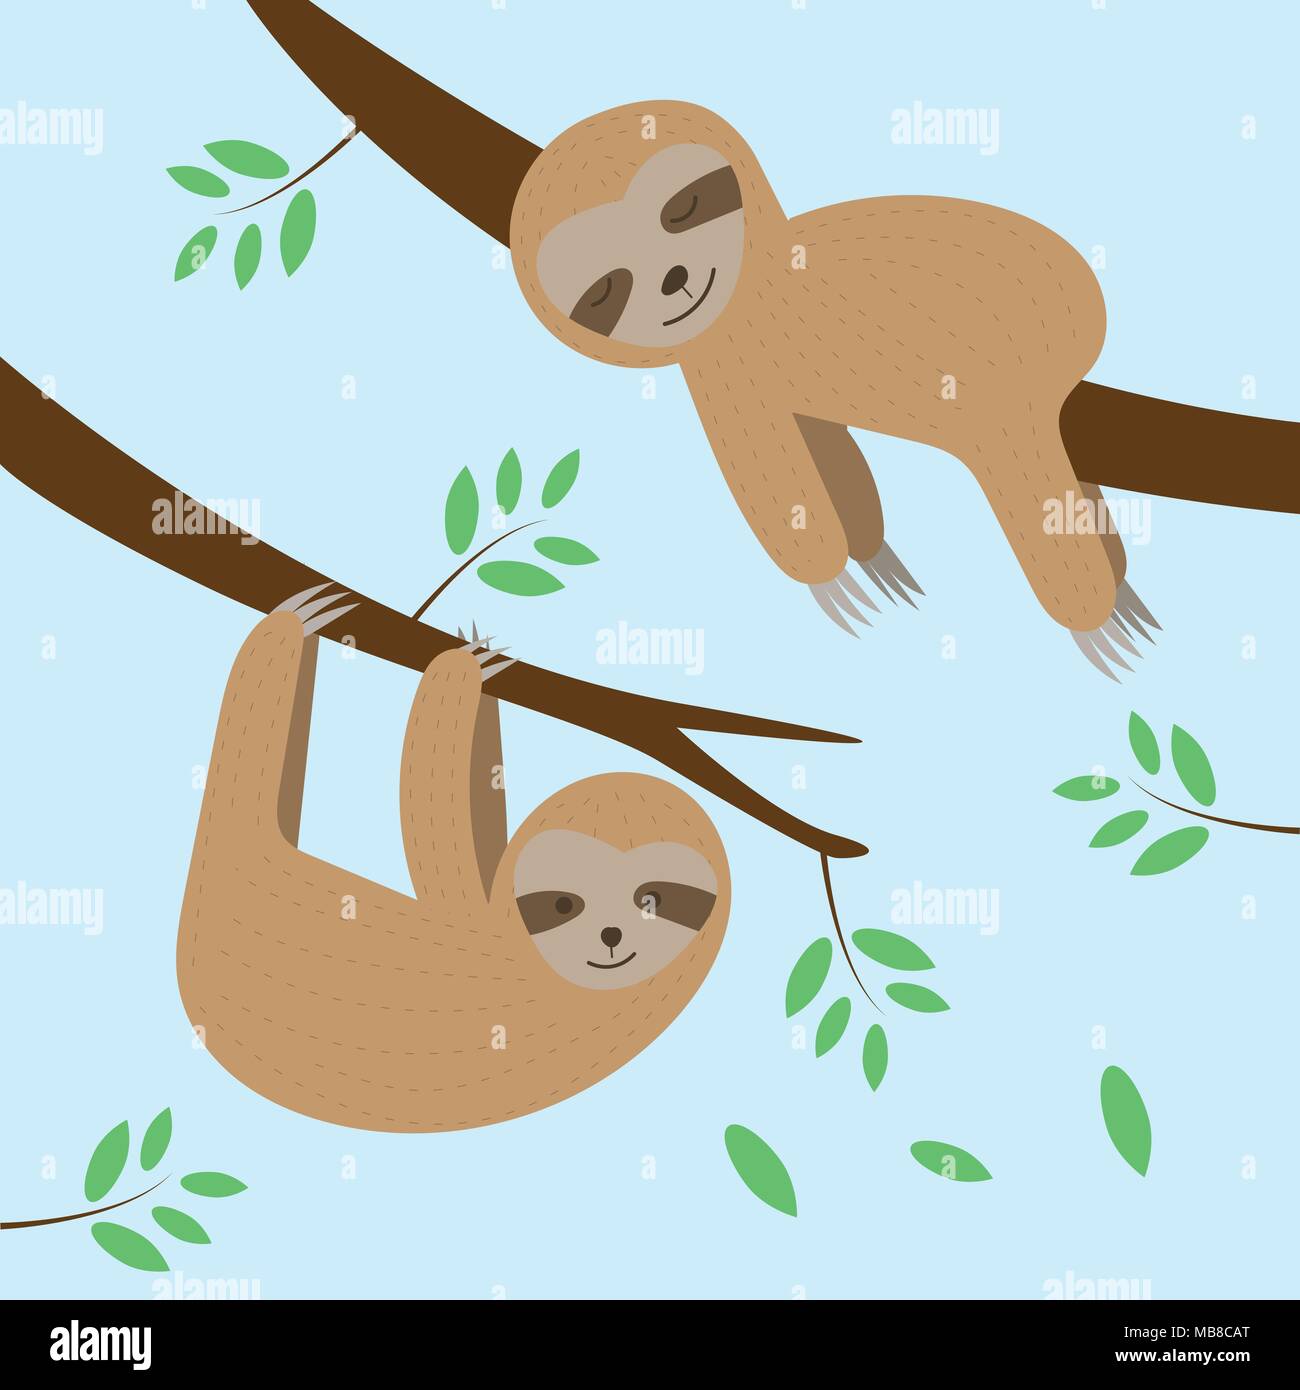 Cute sloths cartoon sleeping and hanging on tree branch background. Vector illustration. Stock Vector